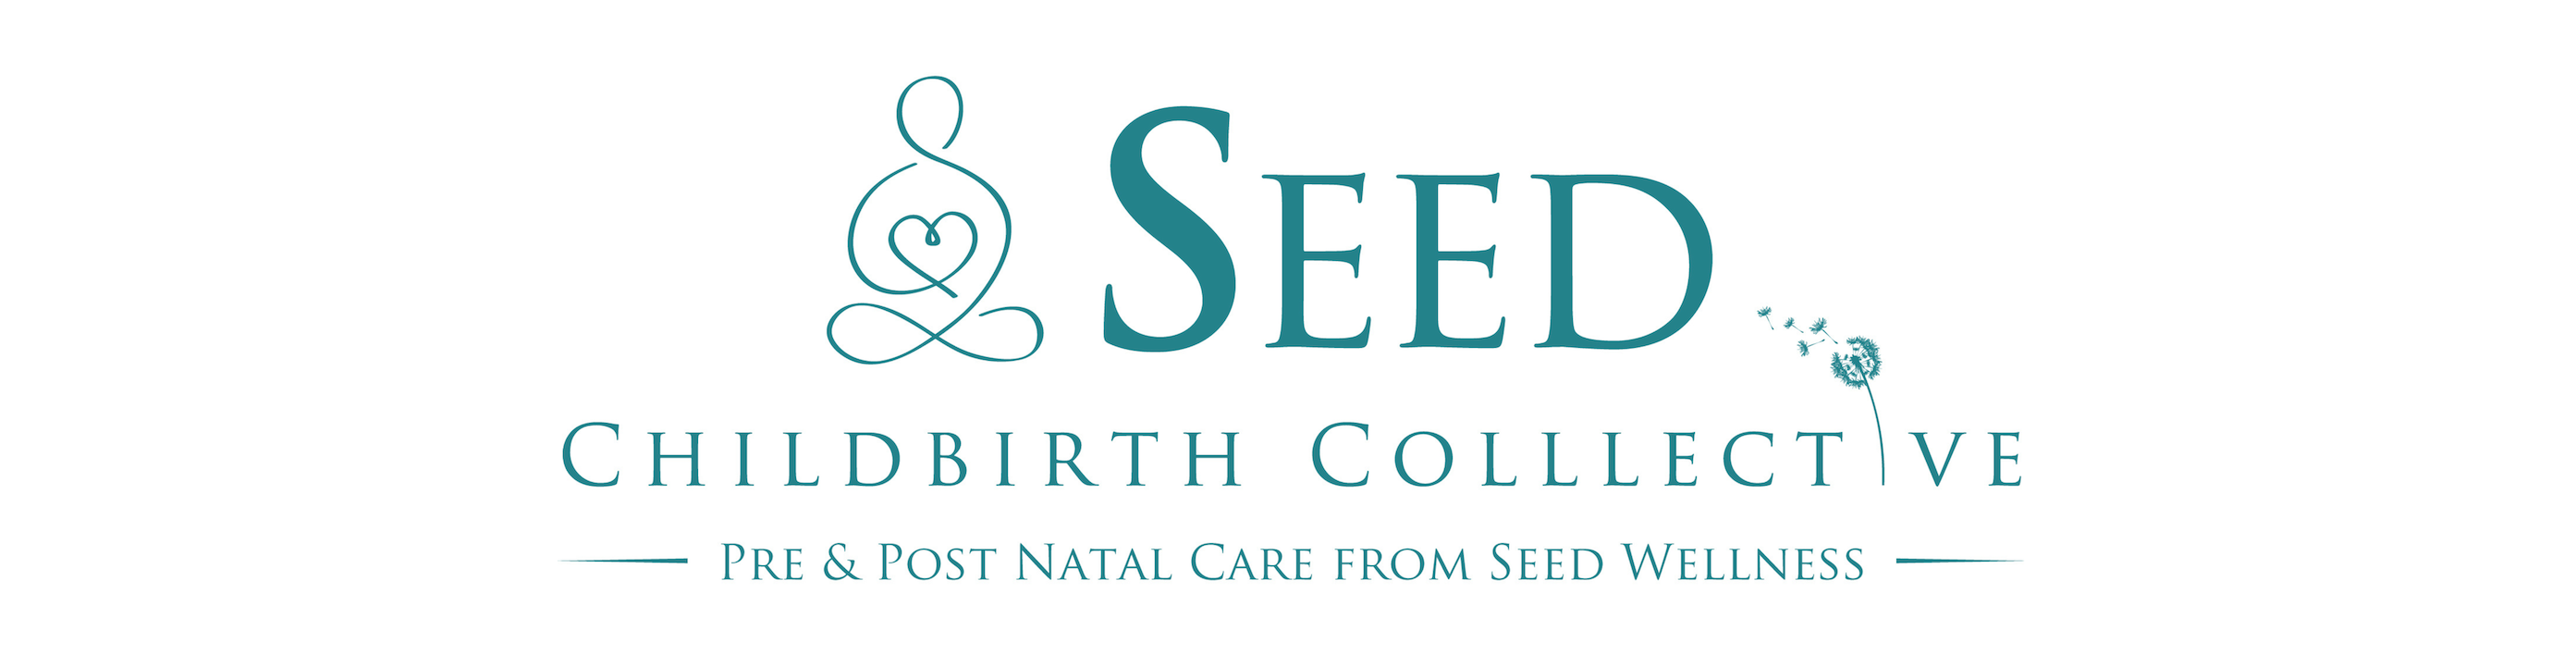 seed childbirth collective